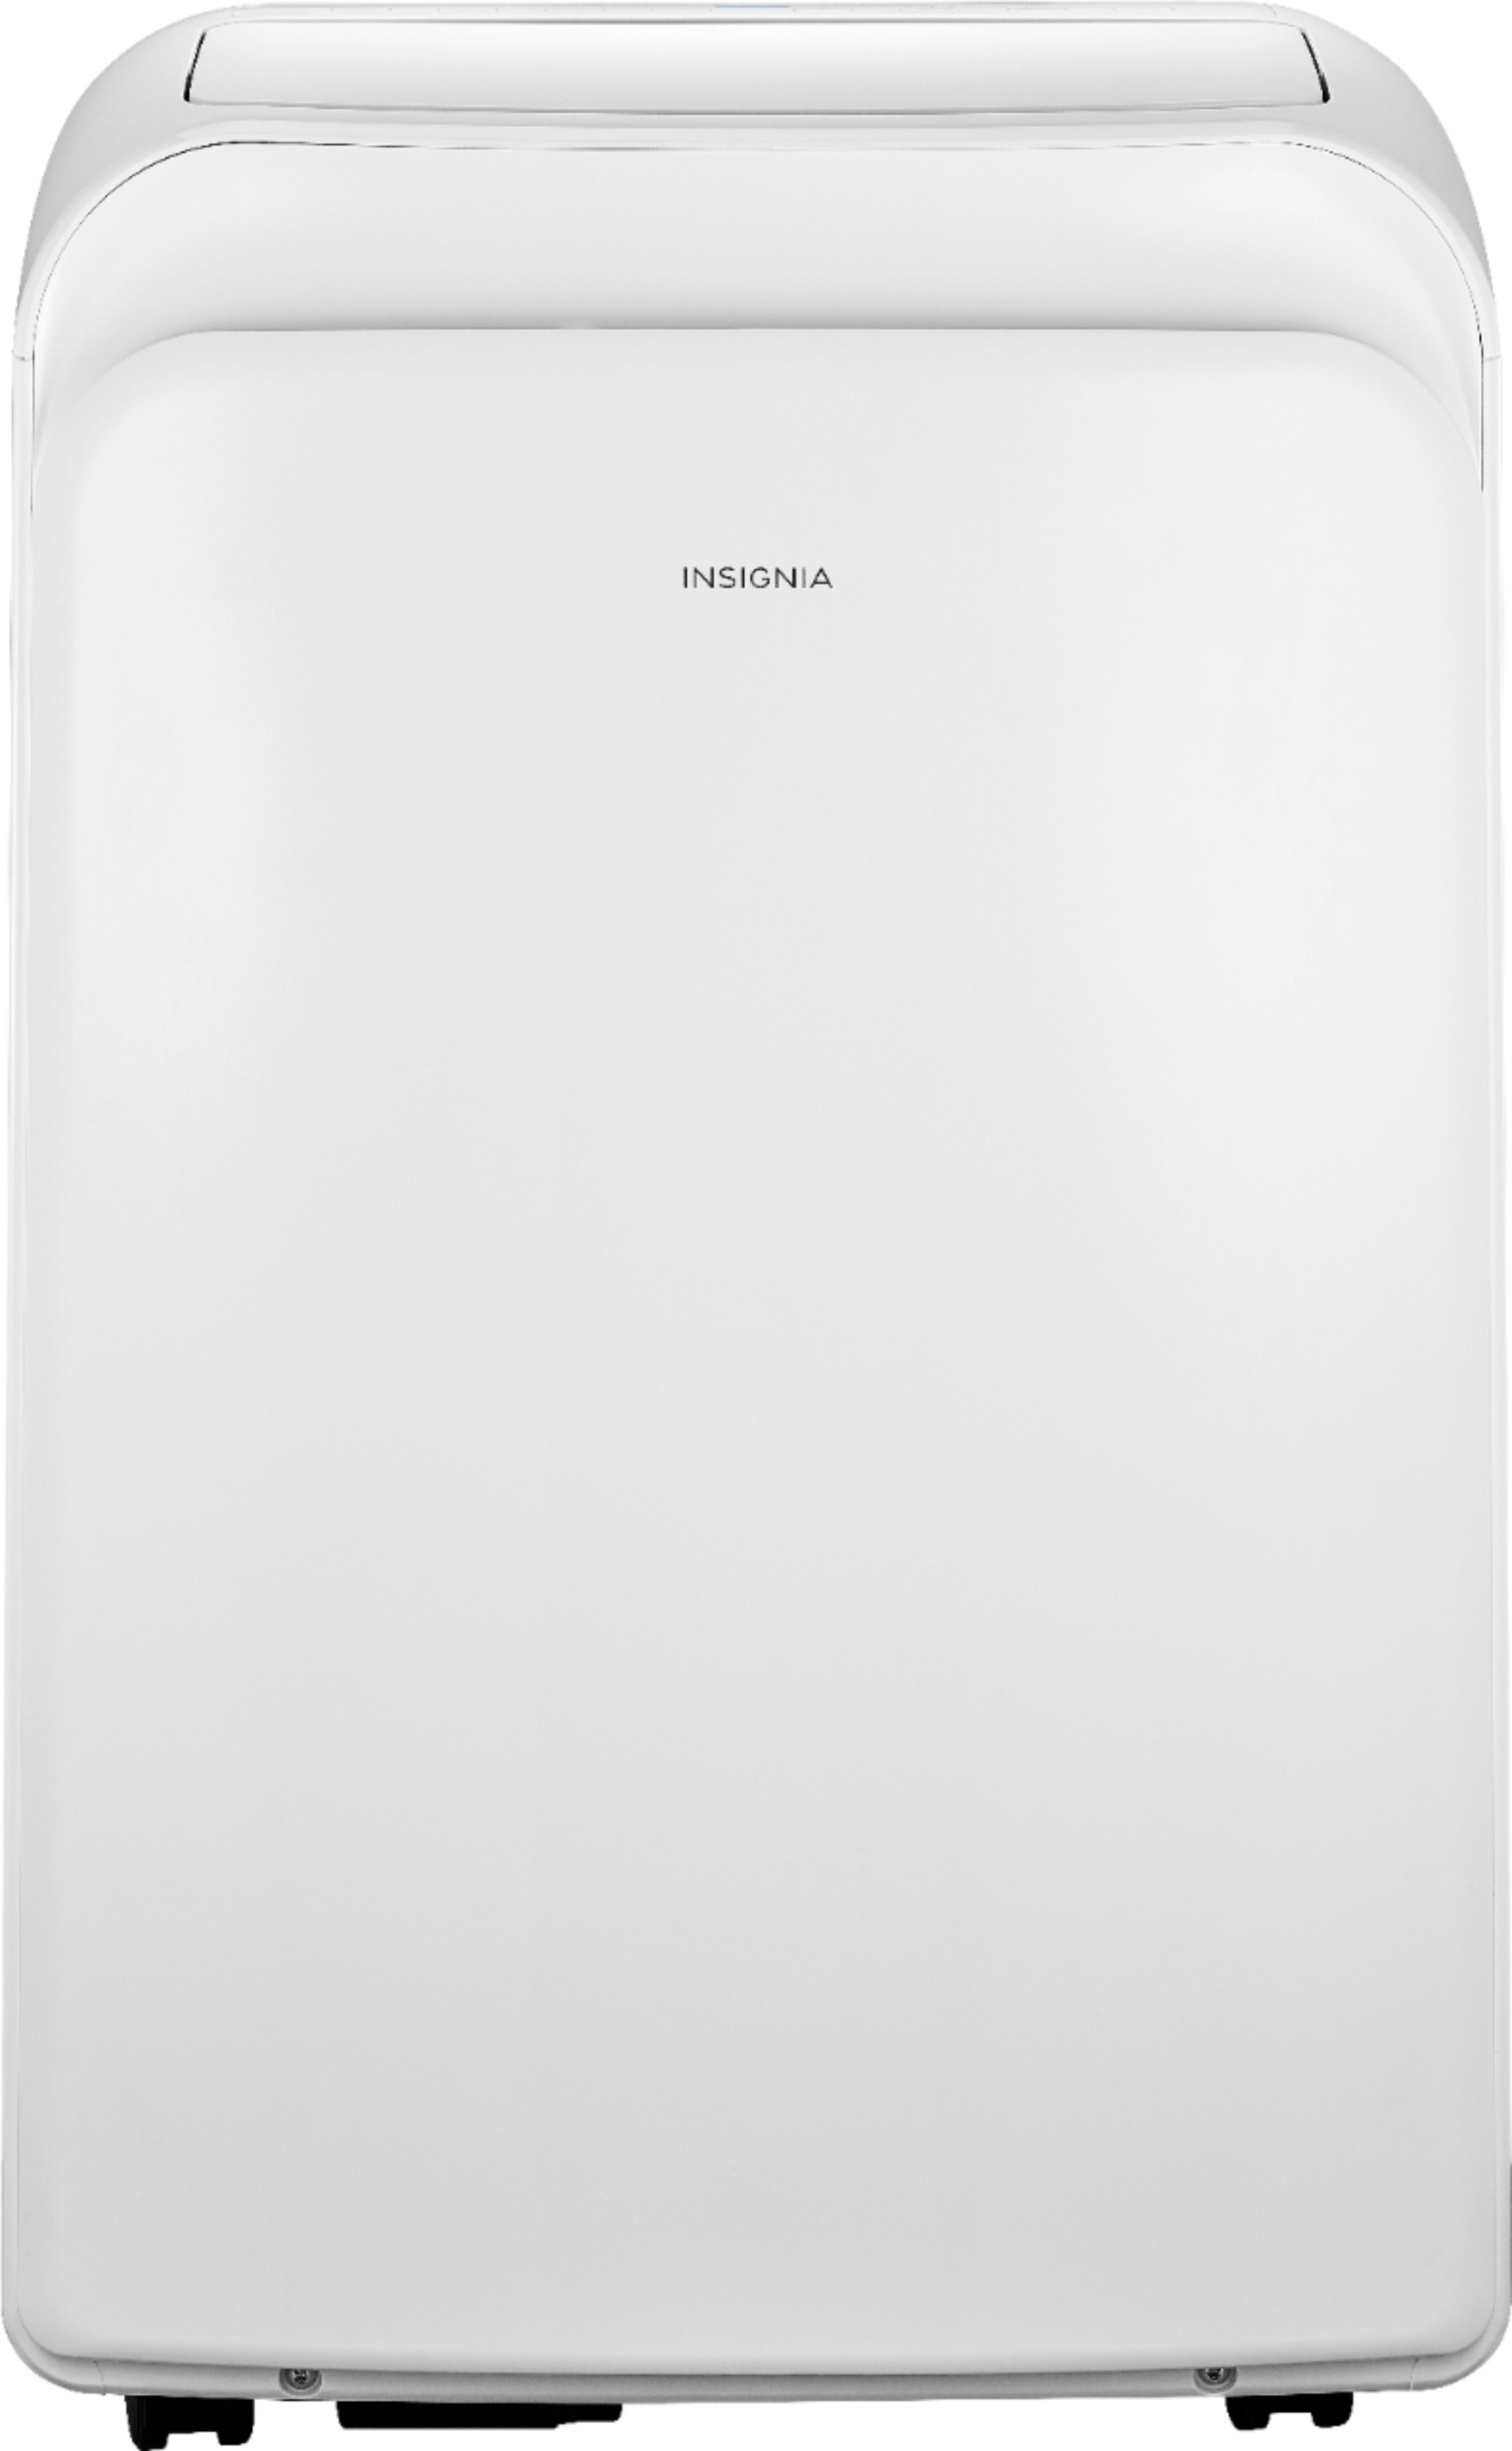 Insignia 250 Sq Ft Portable Air Conditioner White Ns Ac06pwh1 Best Buy